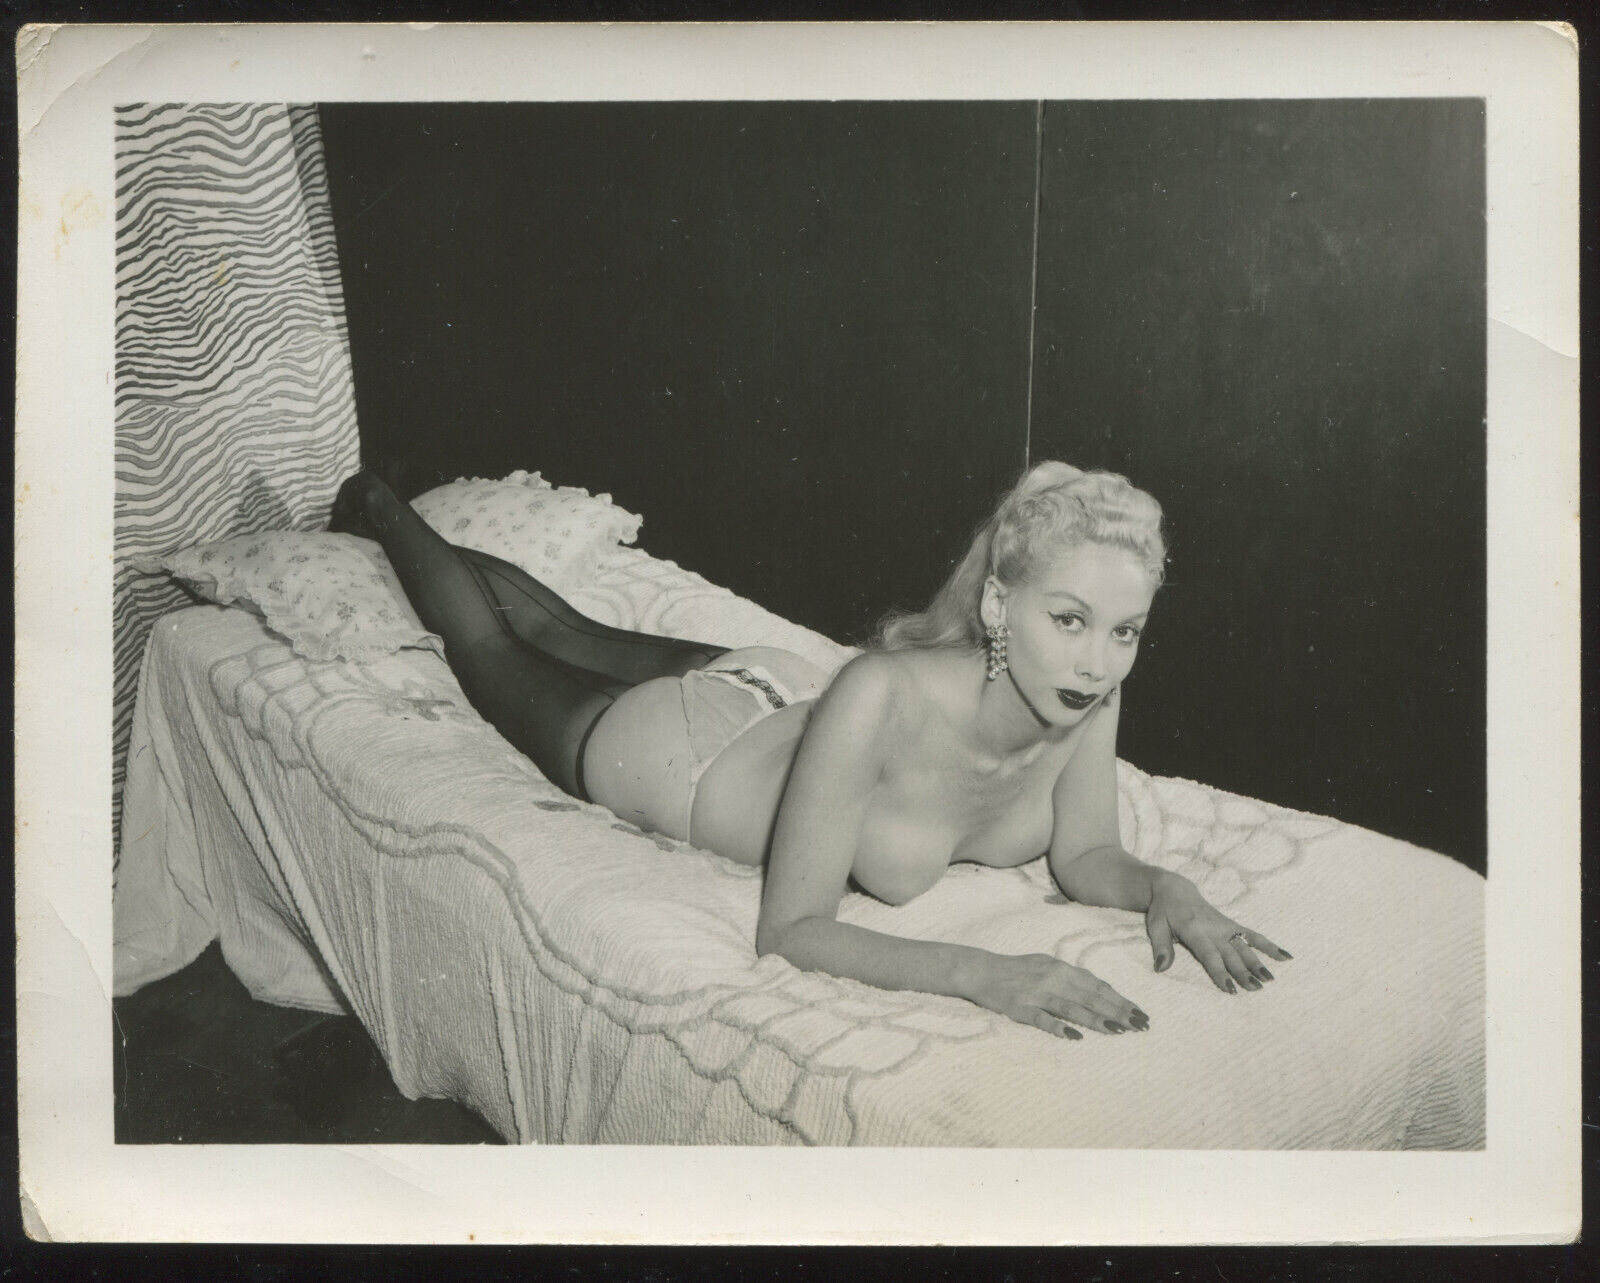 FOUND PHOTO 4x5 Pinup in Pantyhose Laying Prone on Bed 50s Risque Snapshot VTG